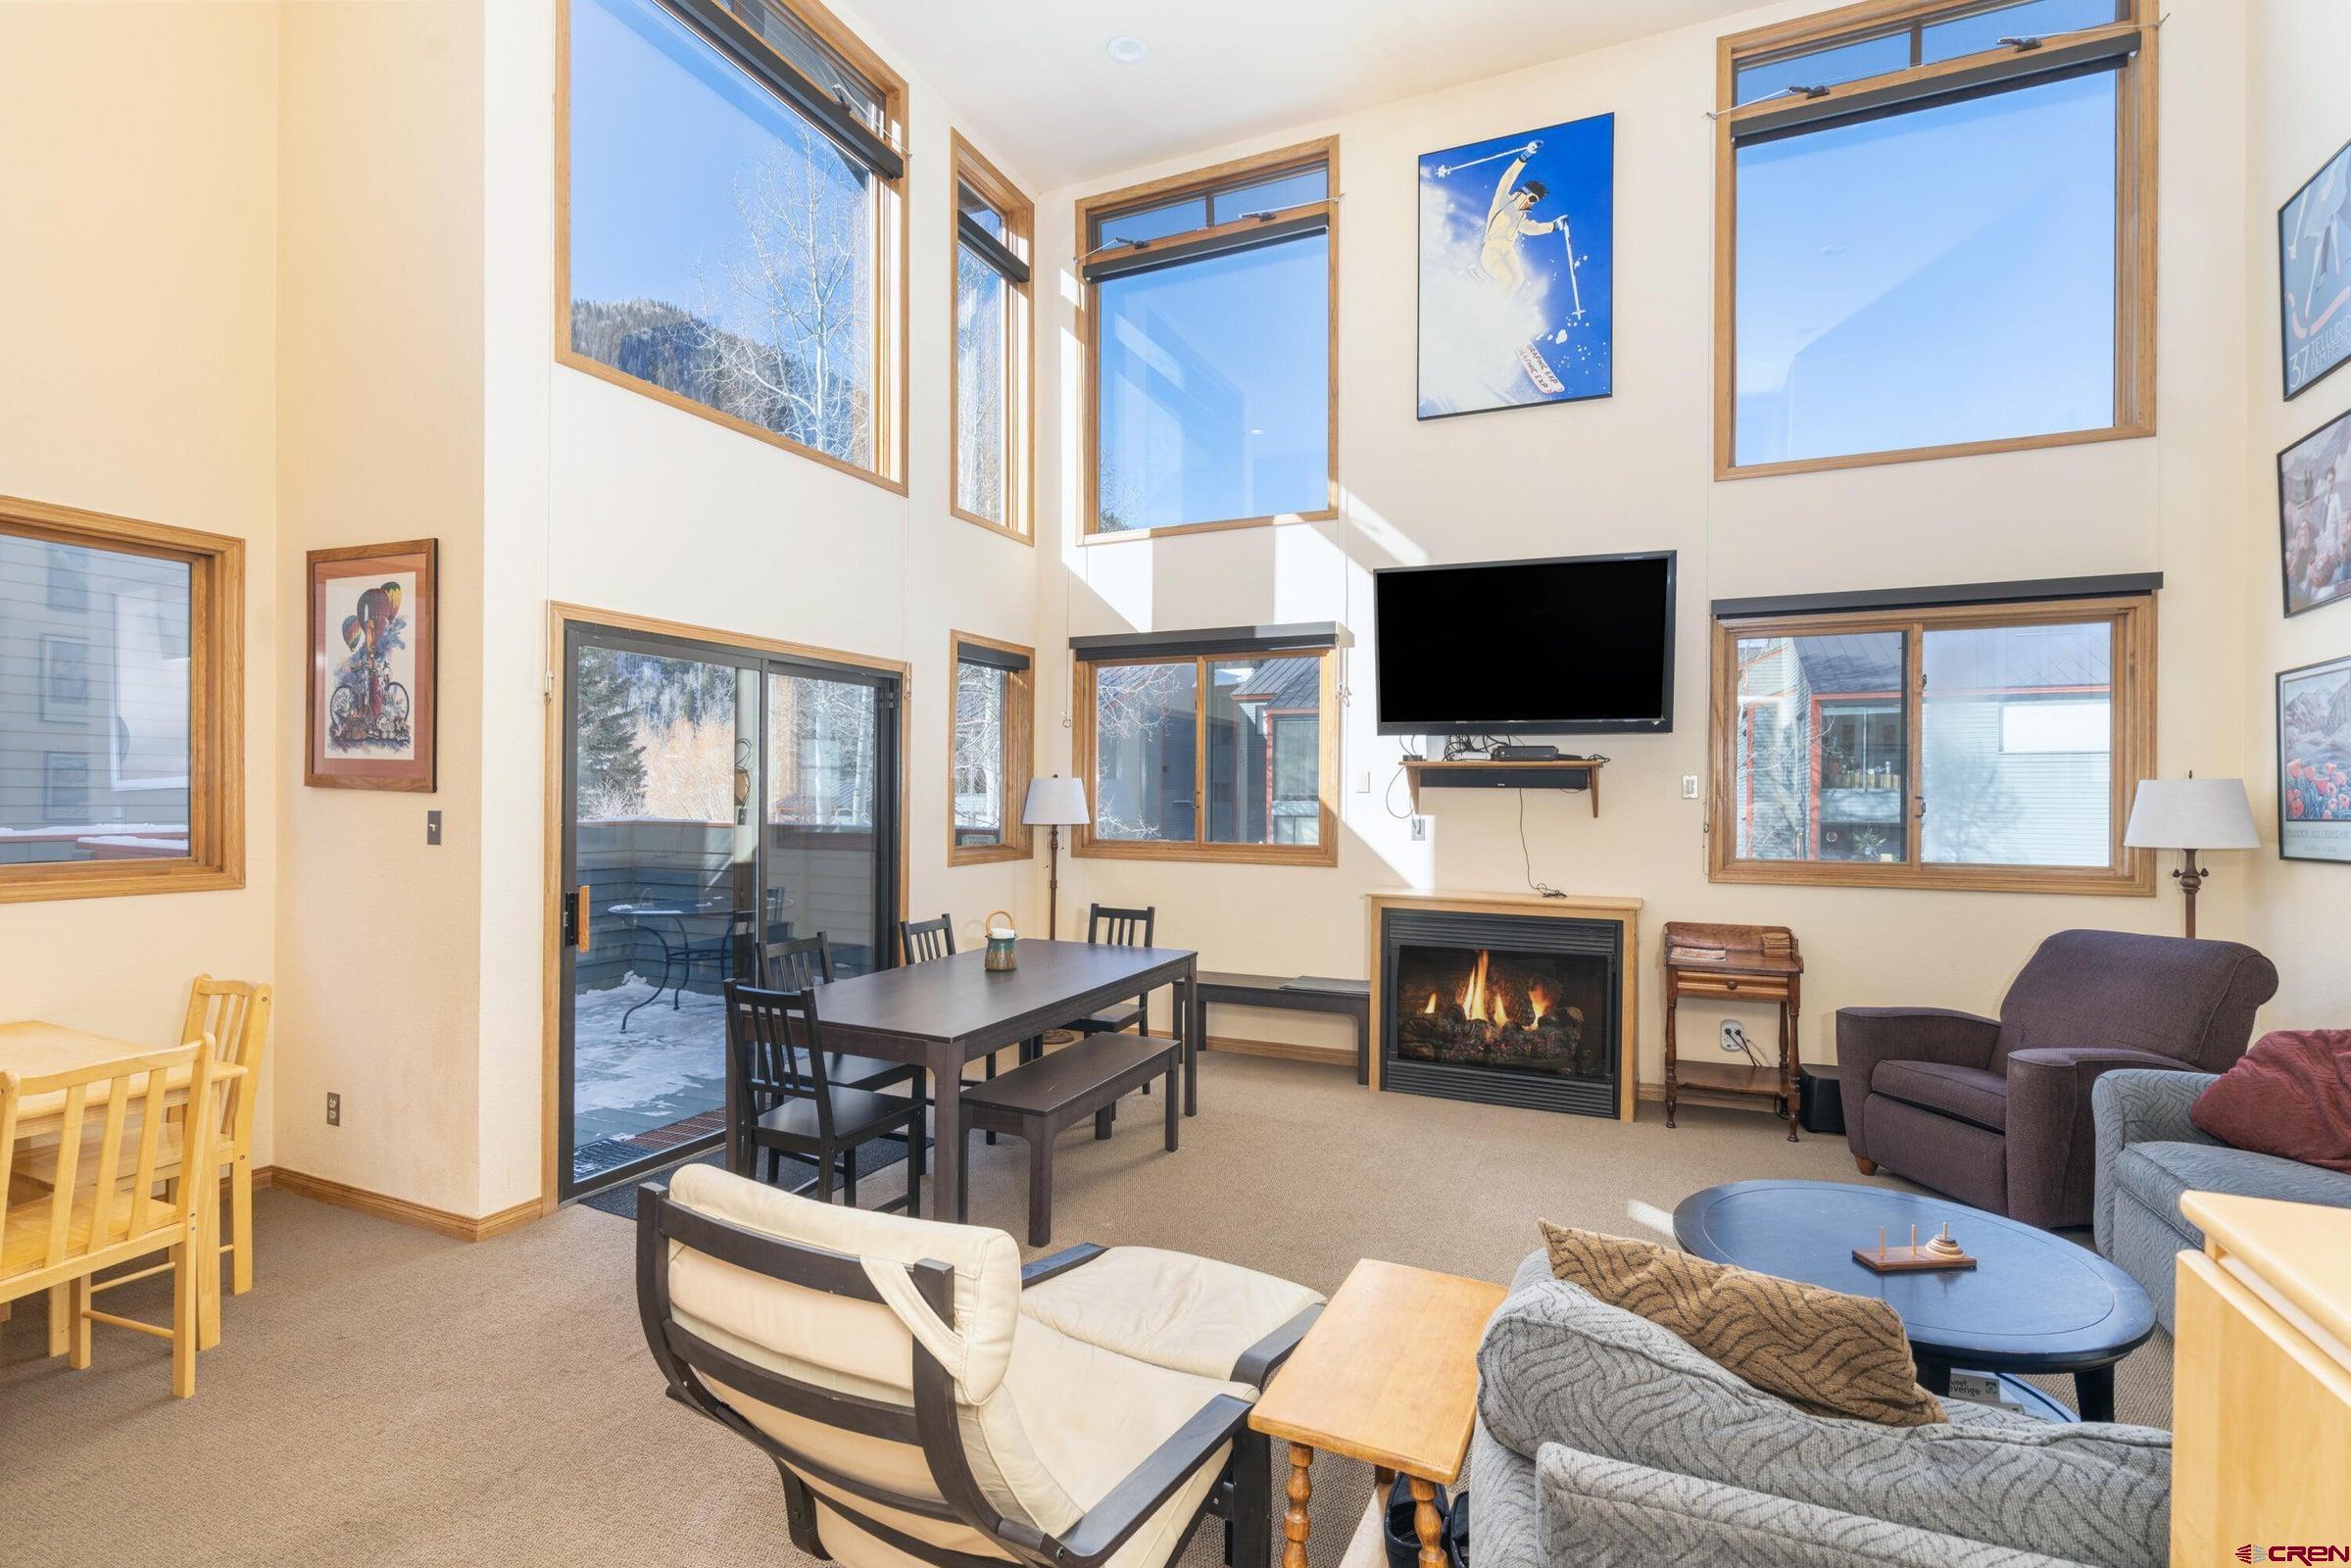 Here's an excellent opportunity to enjoy a classic ski condo or transform it into a top of the line mountain chalet. Nestled 125 yards from lift 7, the river & grocery, this residence enjoys lots of green space with room to picnic & BBQ. It offers big mountain views & is located in our charming historic town. Enjoy cozy, warm spaces designed for relaxation. Two separate living areas allow for maximum privacy & fun time with kids & adults, or two families. A soaring ceiling, minimal common walls, & a sunny, private deck allow plenty of elbow room. Upwards of 900 add'l sq.ft. can be utilized by creating extra spaces by expanding vertically into the attic & also the lowest level. Potential exists to convert into two separate units. Get a STR license for short-term rental possibilities!